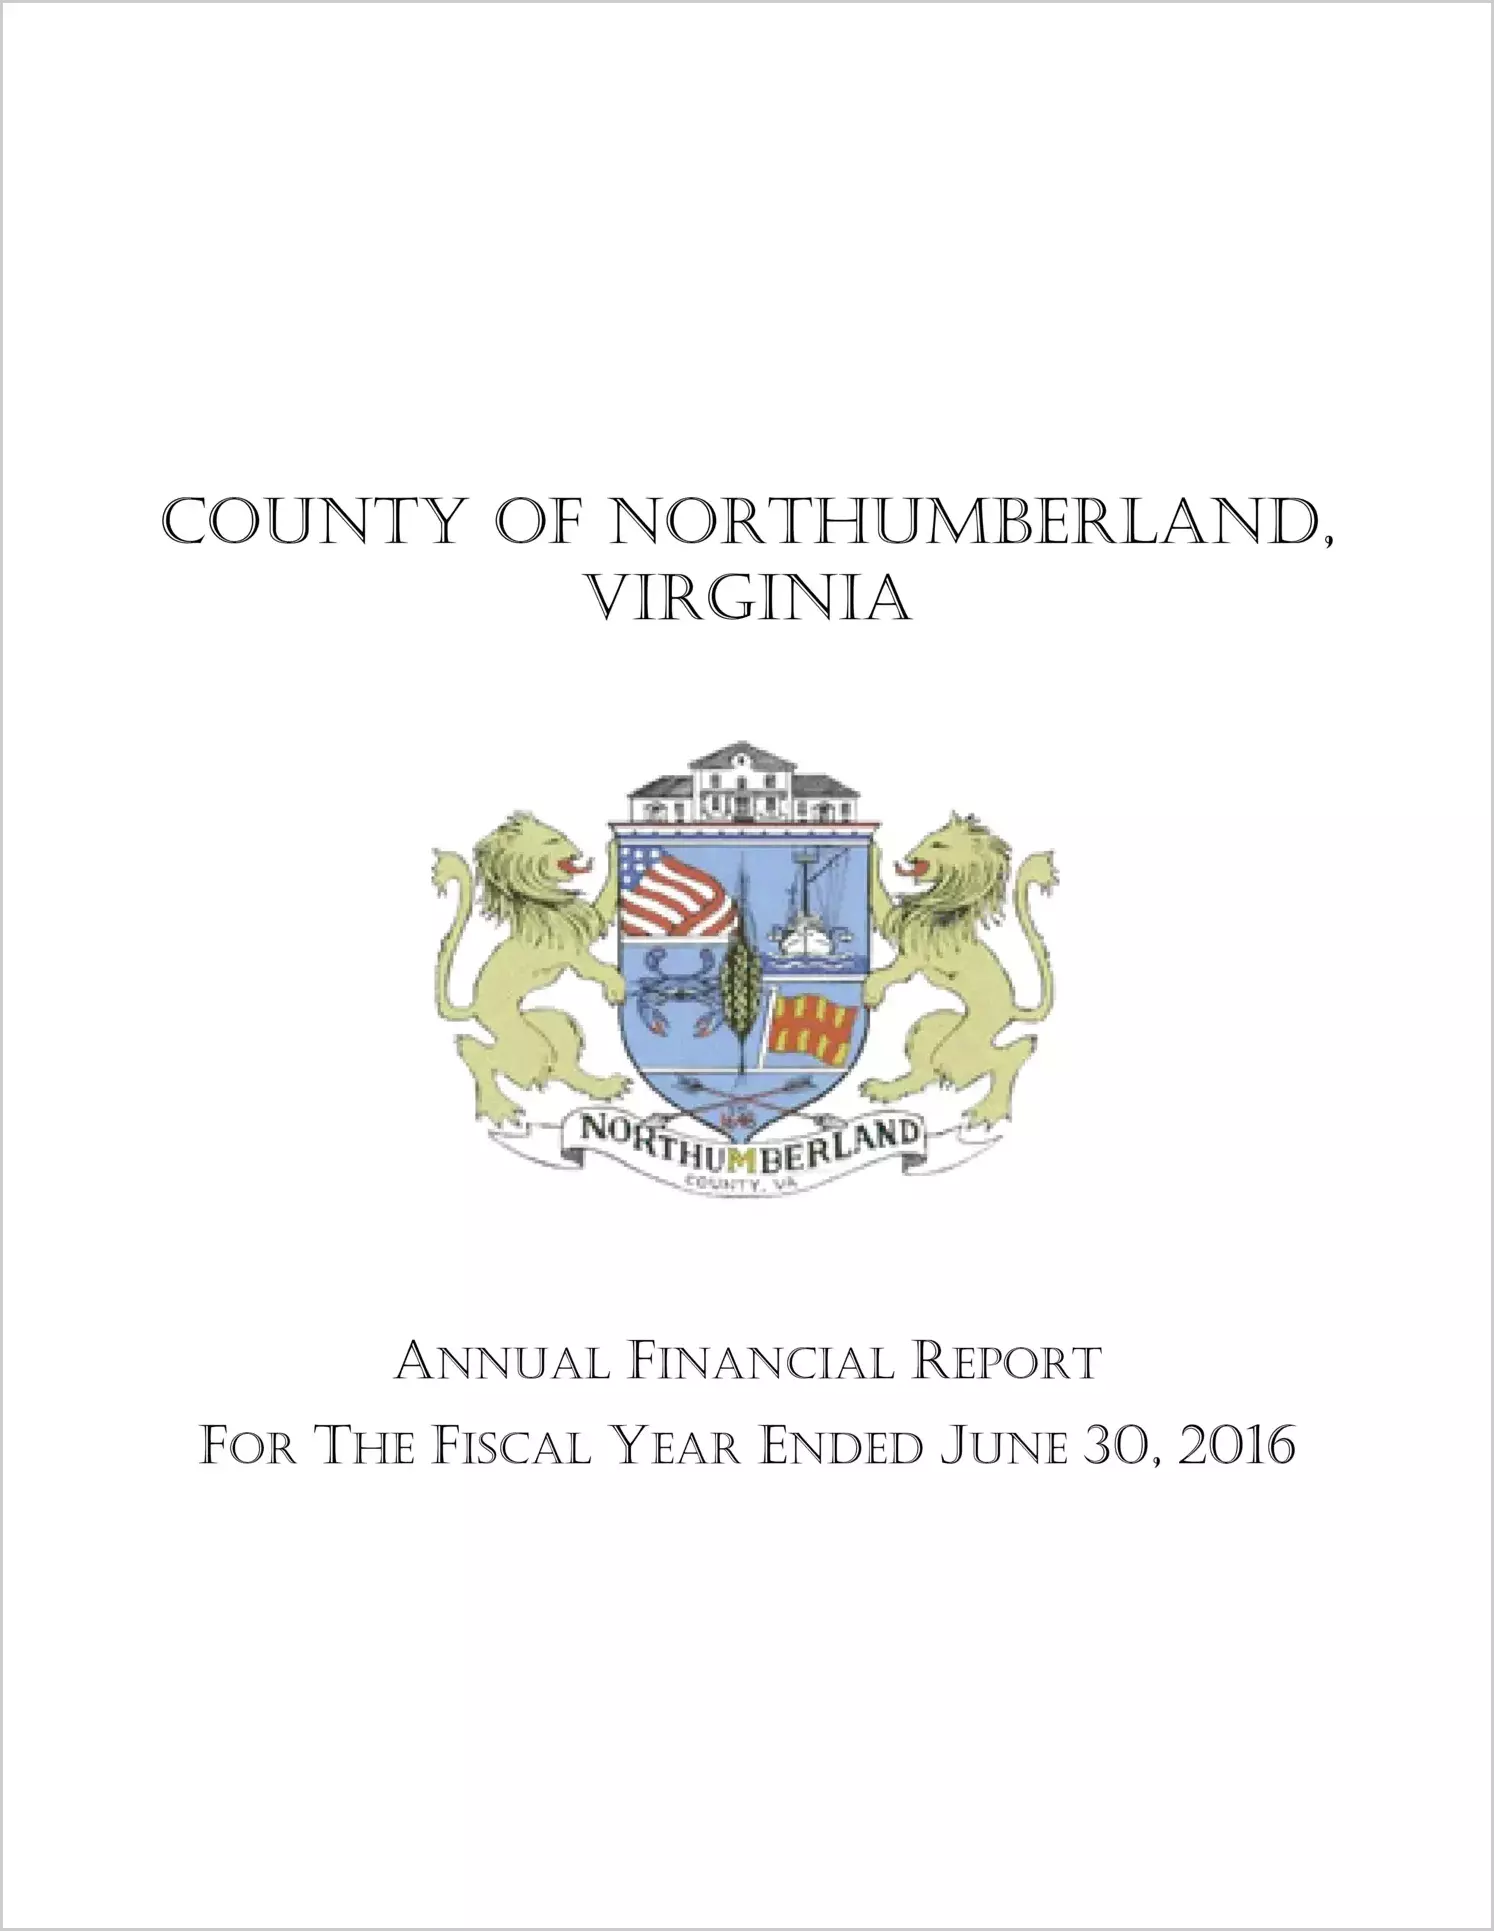 2016 Annual Financial Report for County of Northumberland